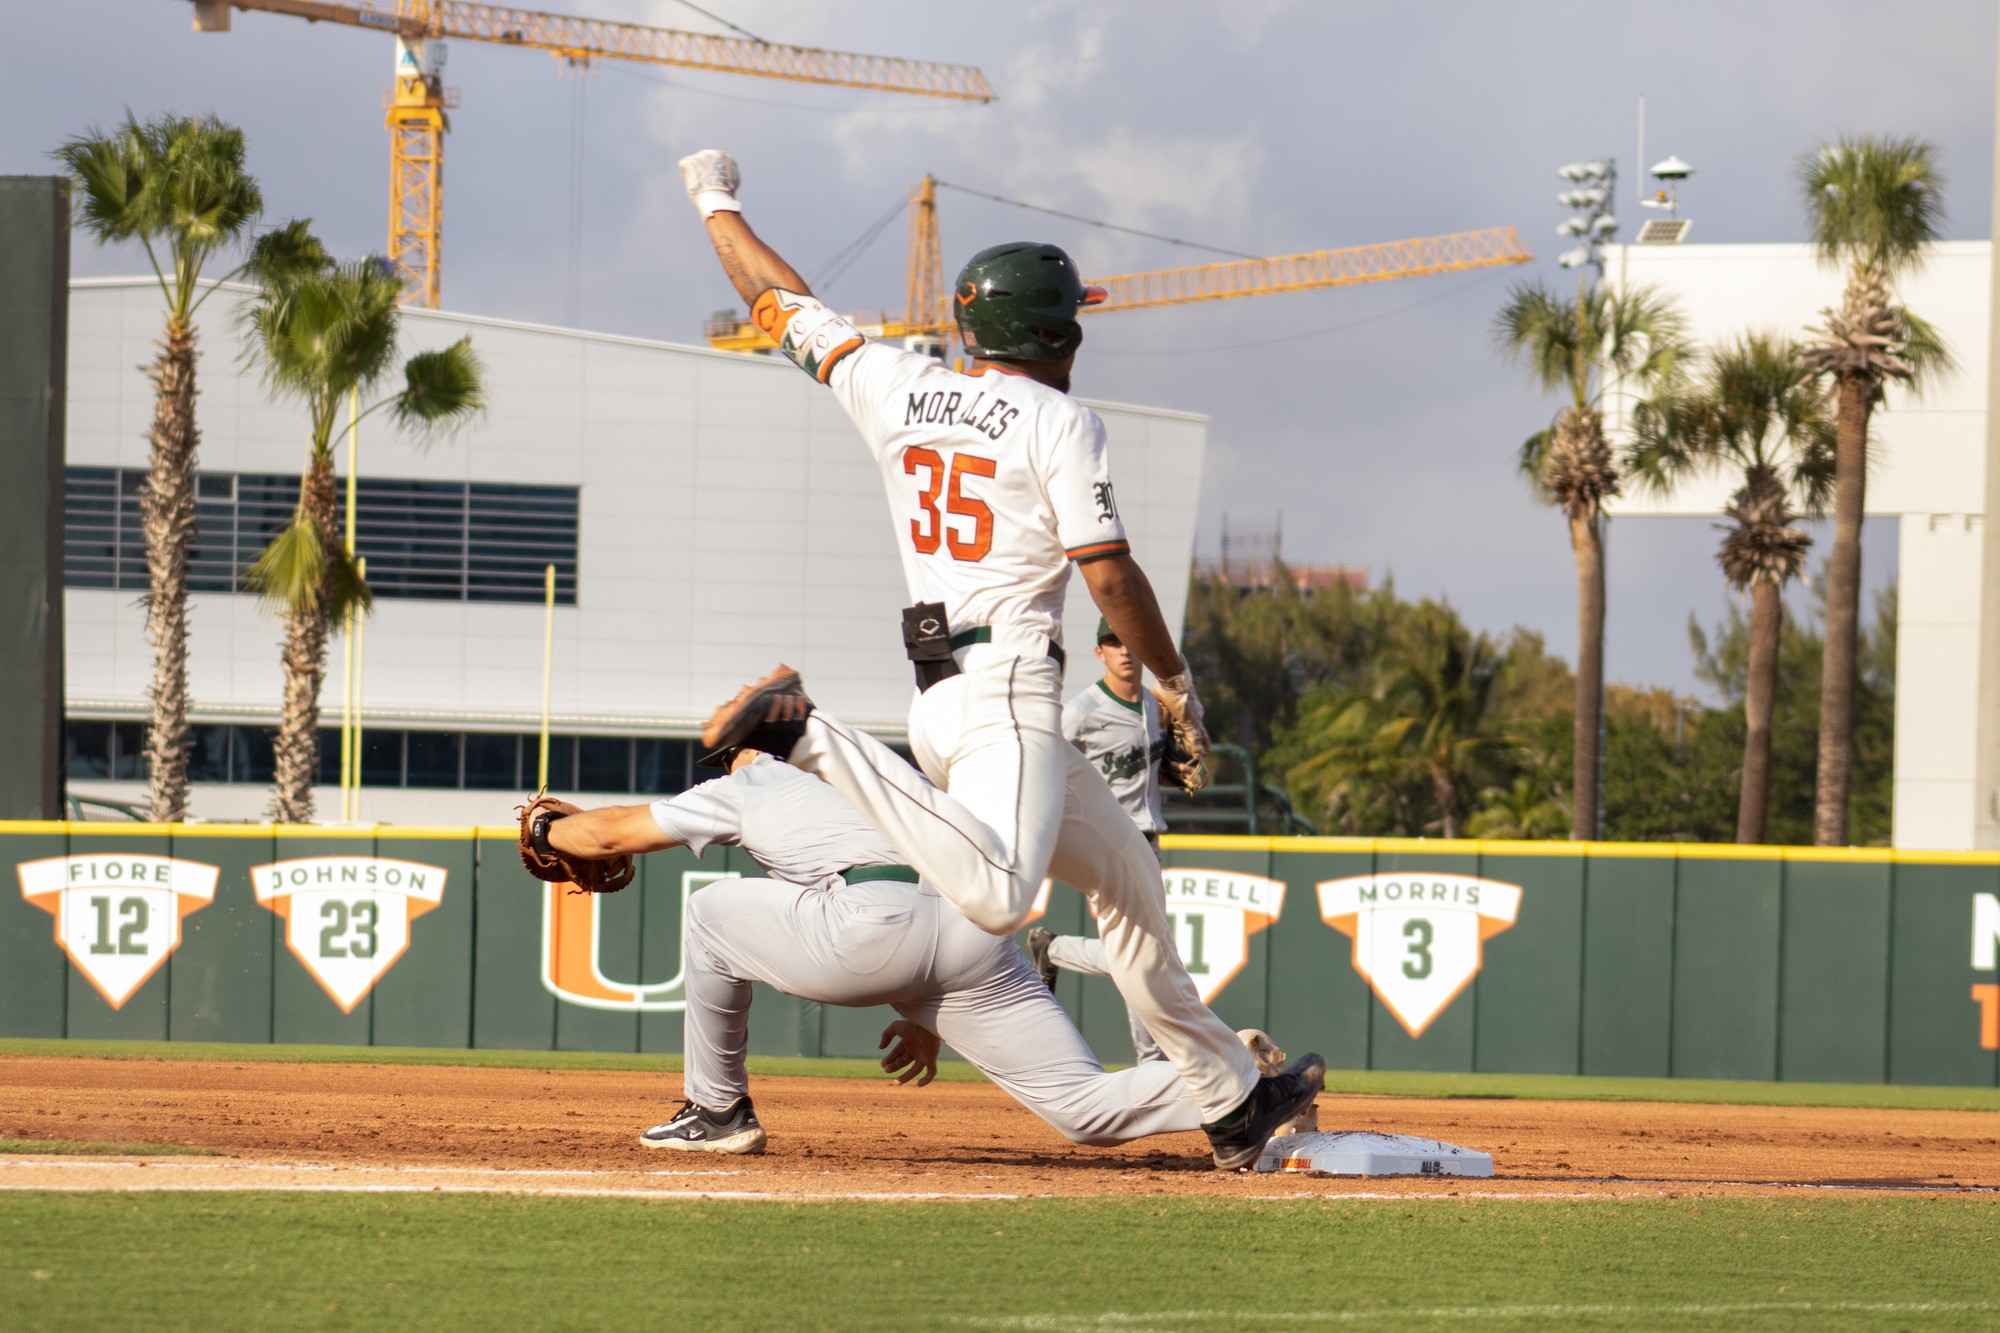 Miami's offense goes silent in 6-3 loss to Jacksonville - The